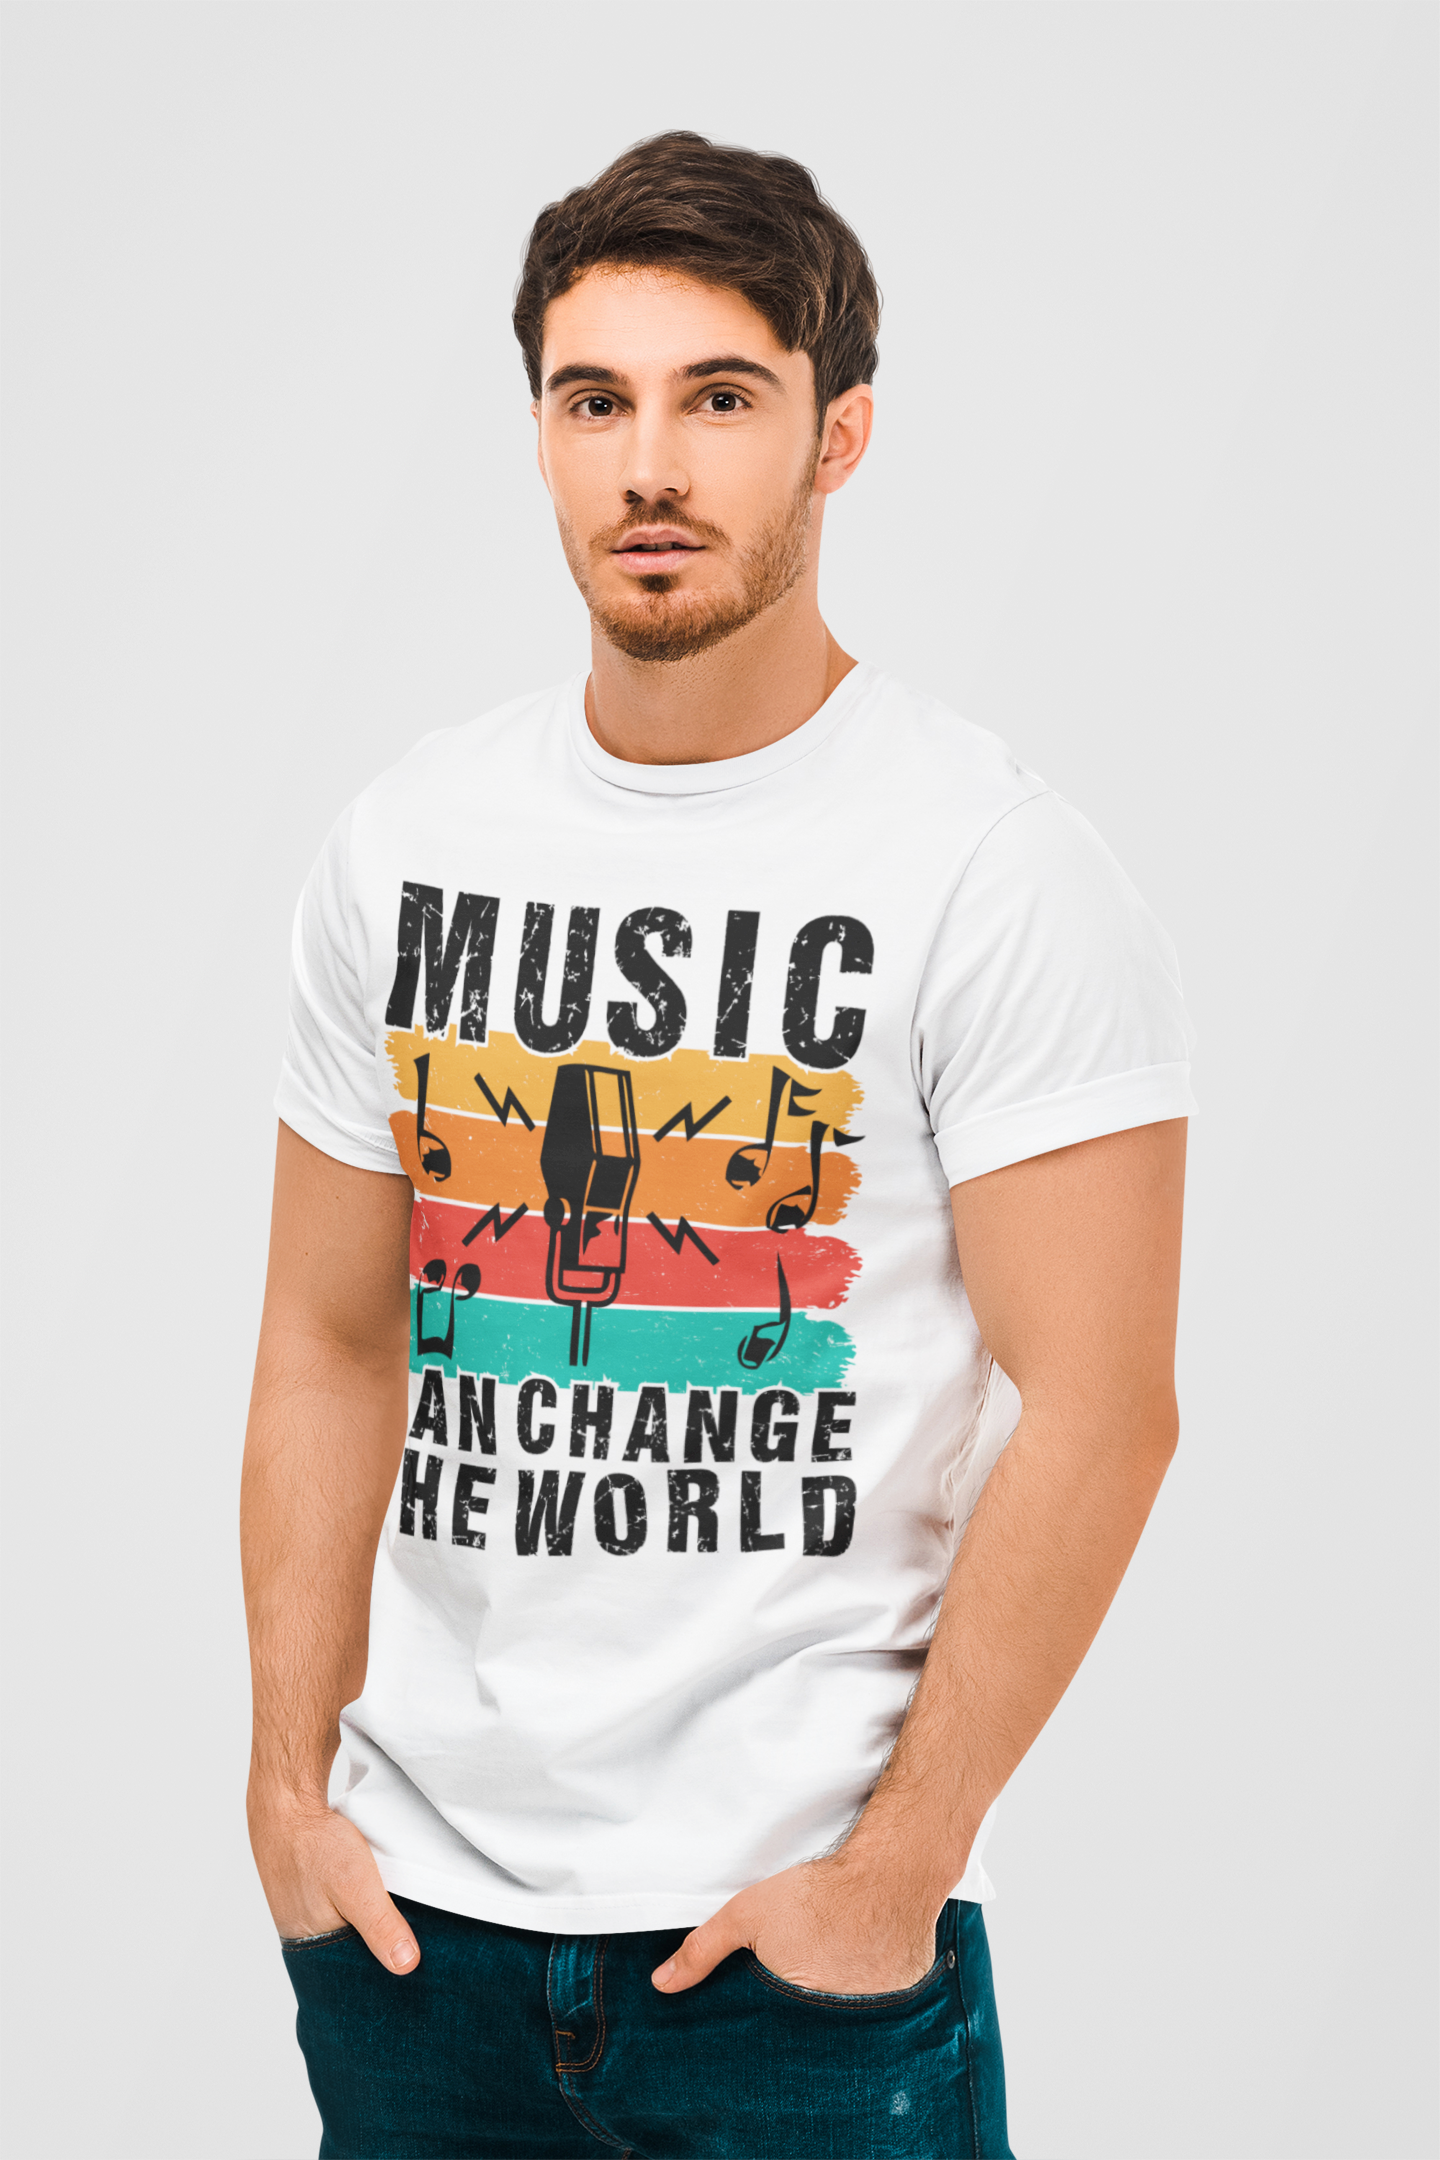 Music Can Change The World White Round Neck T-Shirt for Men